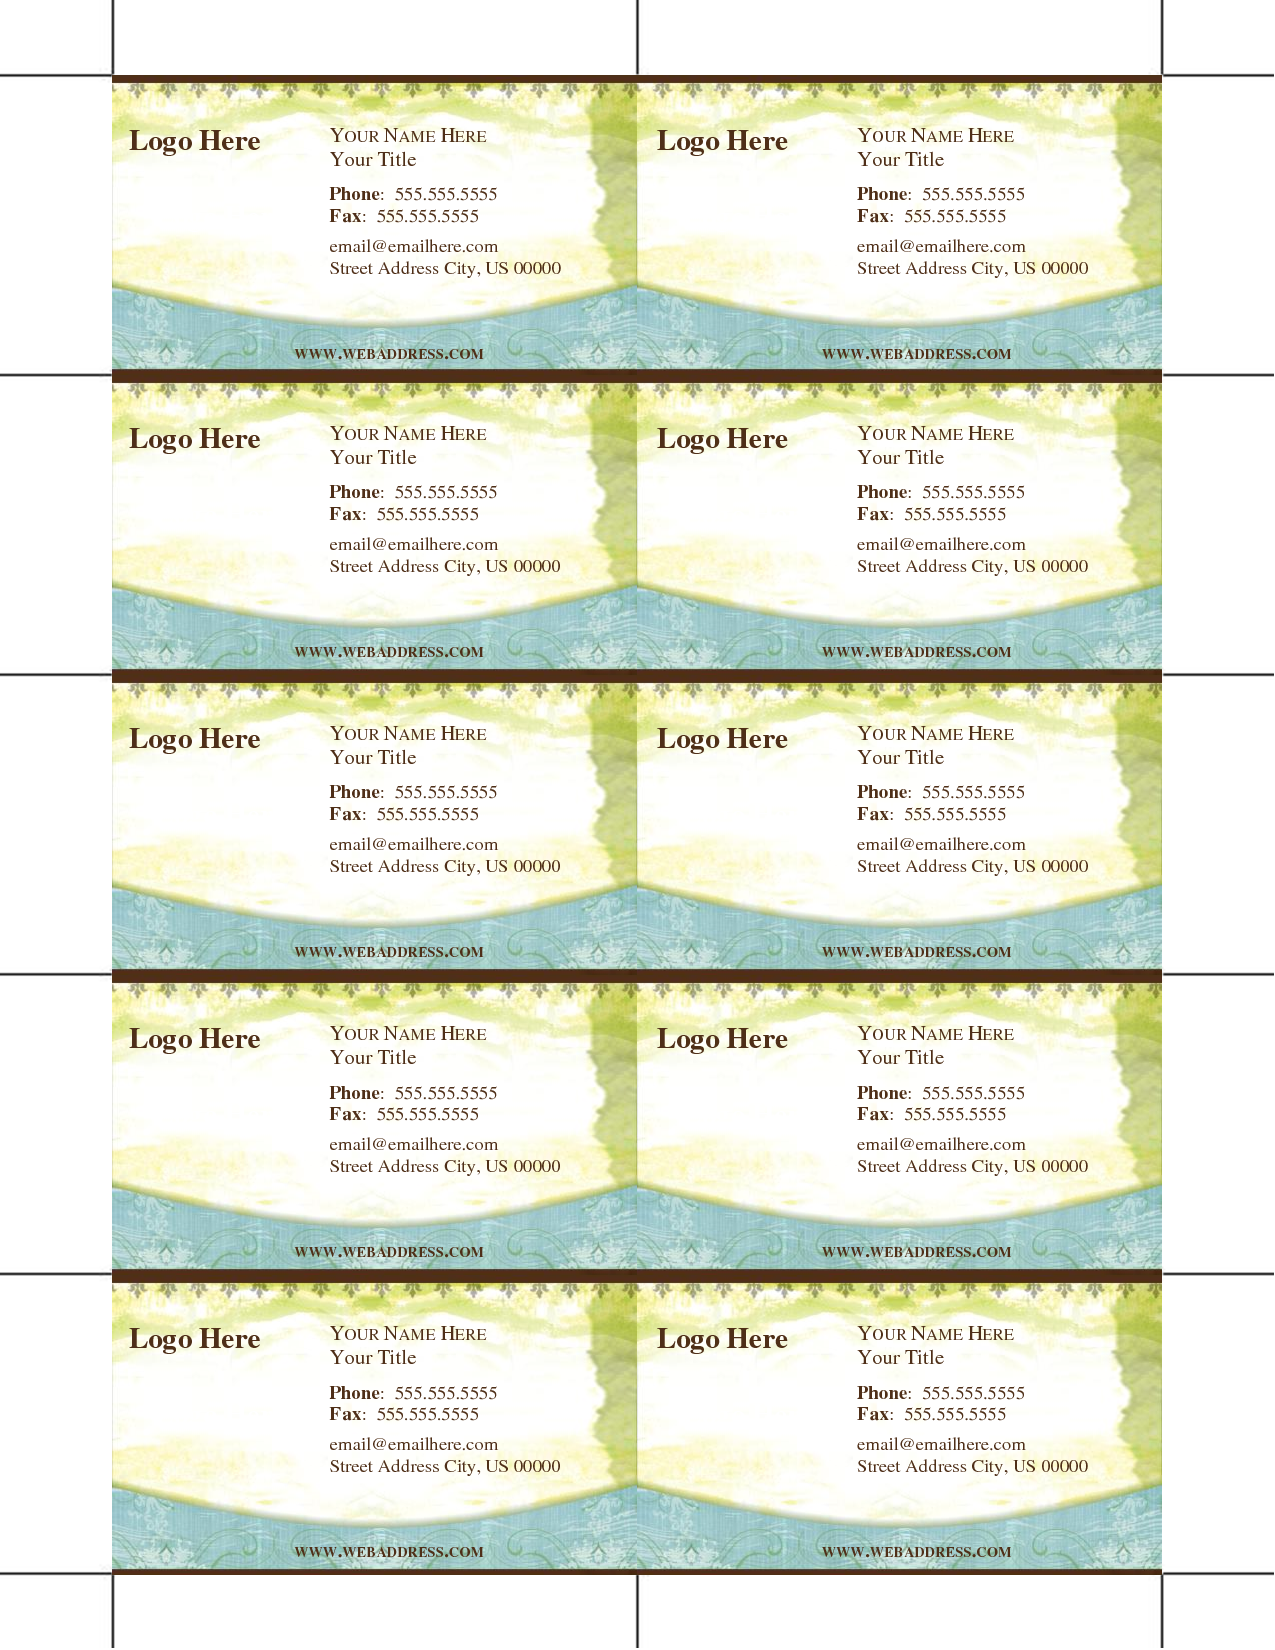 free-business-cards-printable